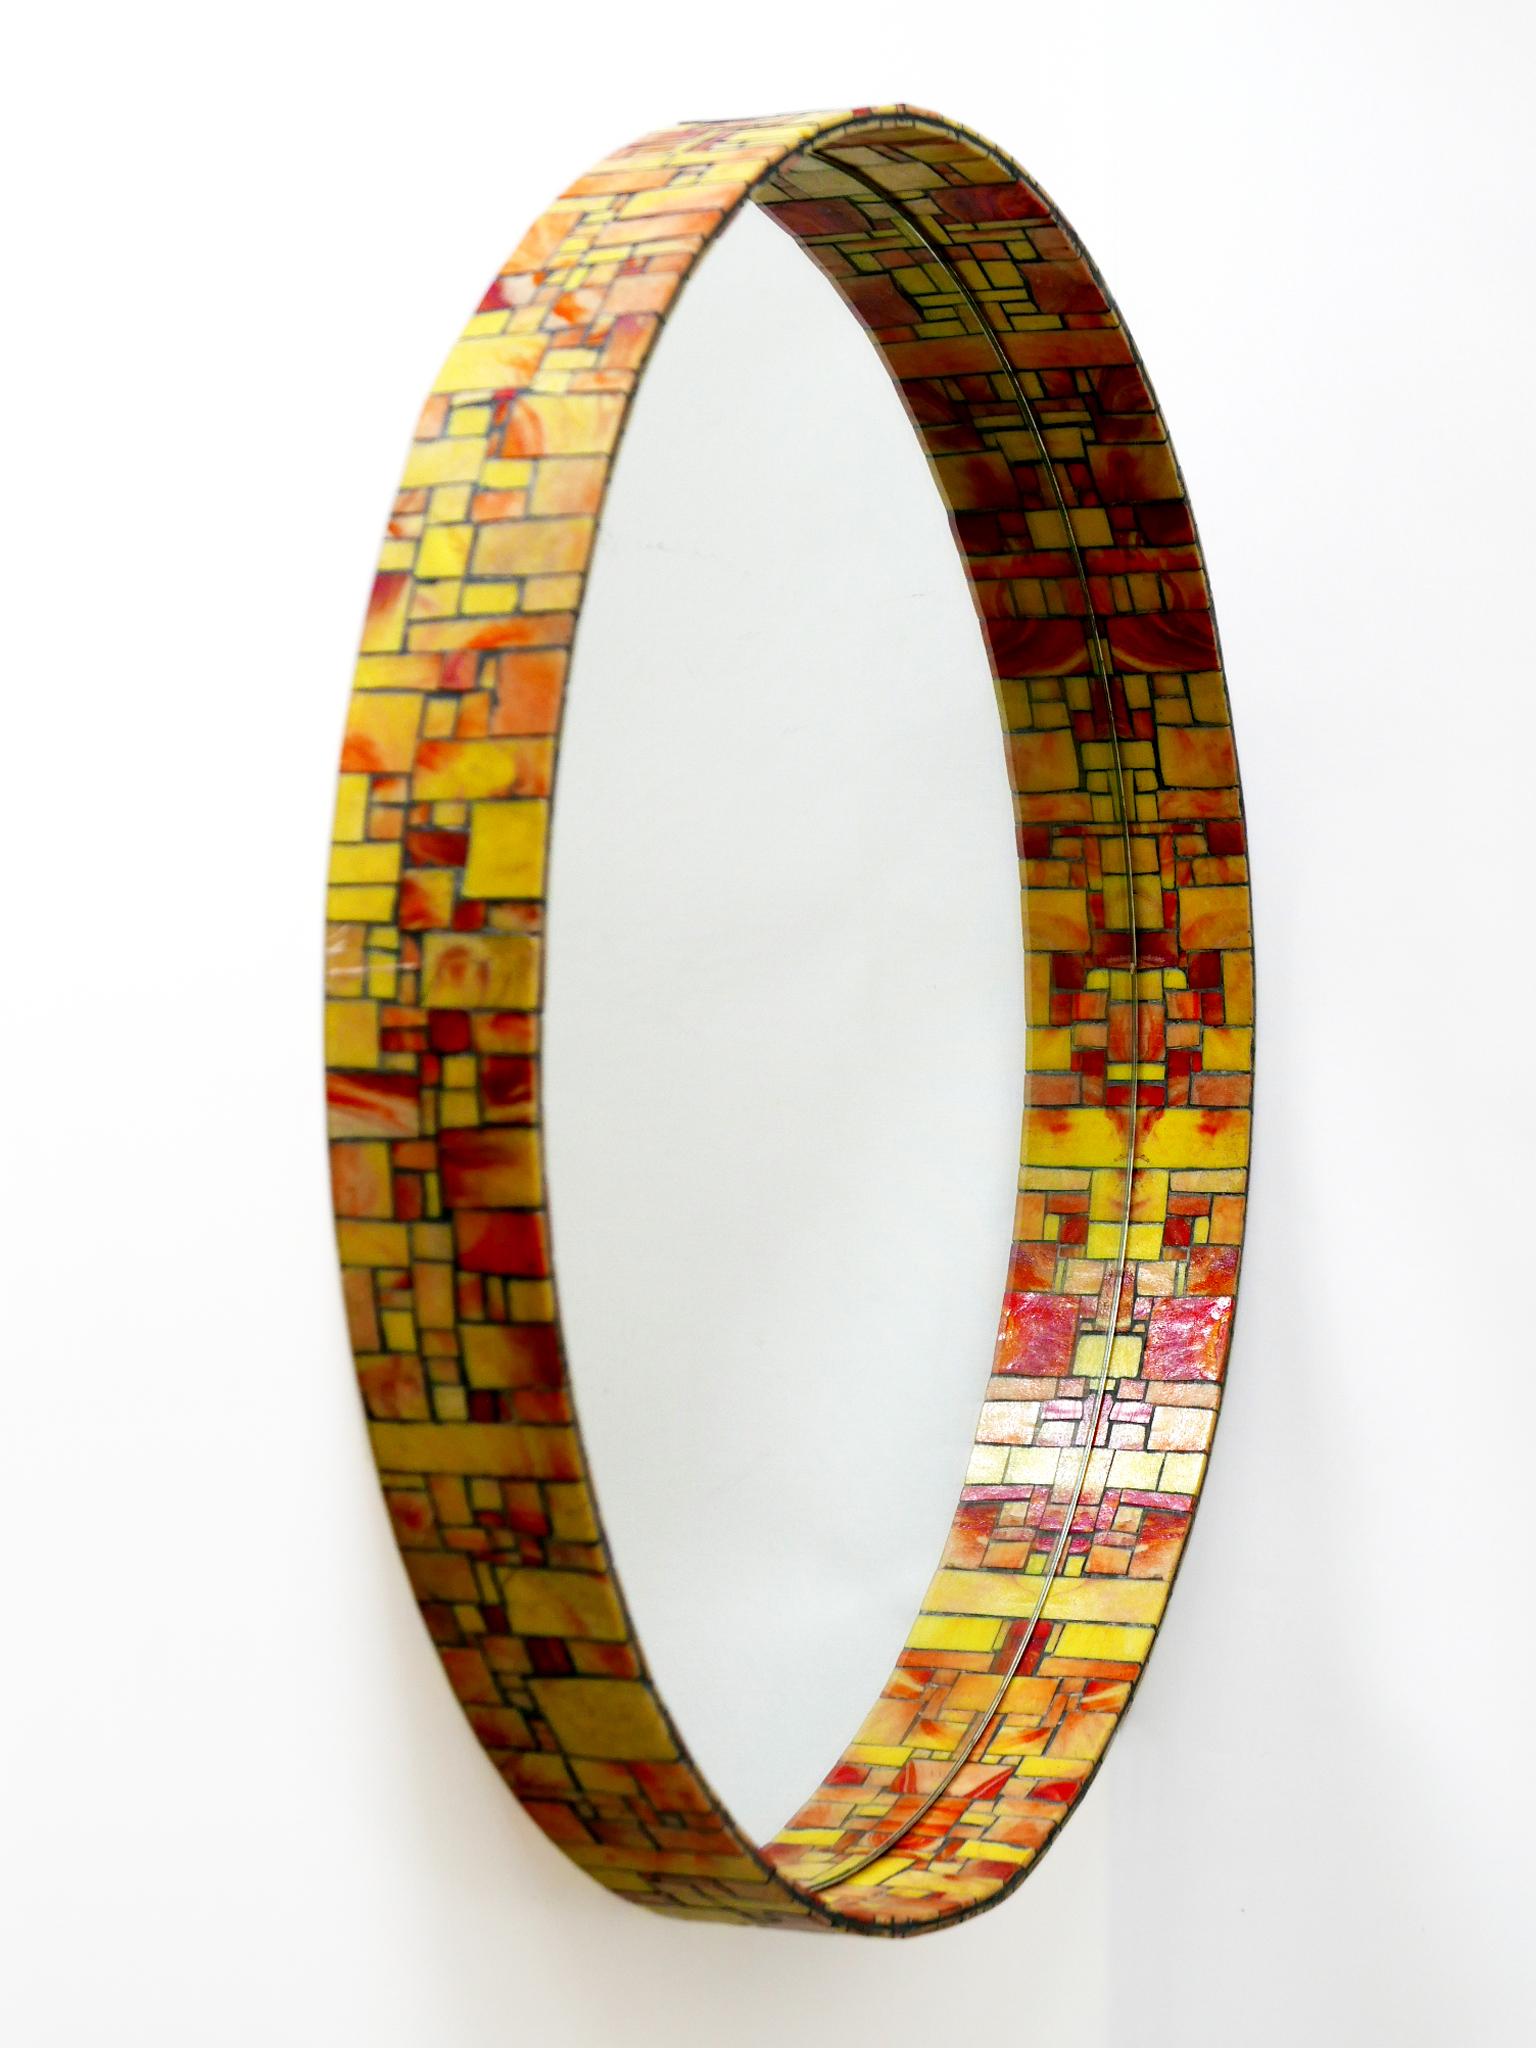 Mid-20th Century Exceptional Mid-Century Modern Mosaic Framed Circular Wall Mirror, Italy, 1960s For Sale